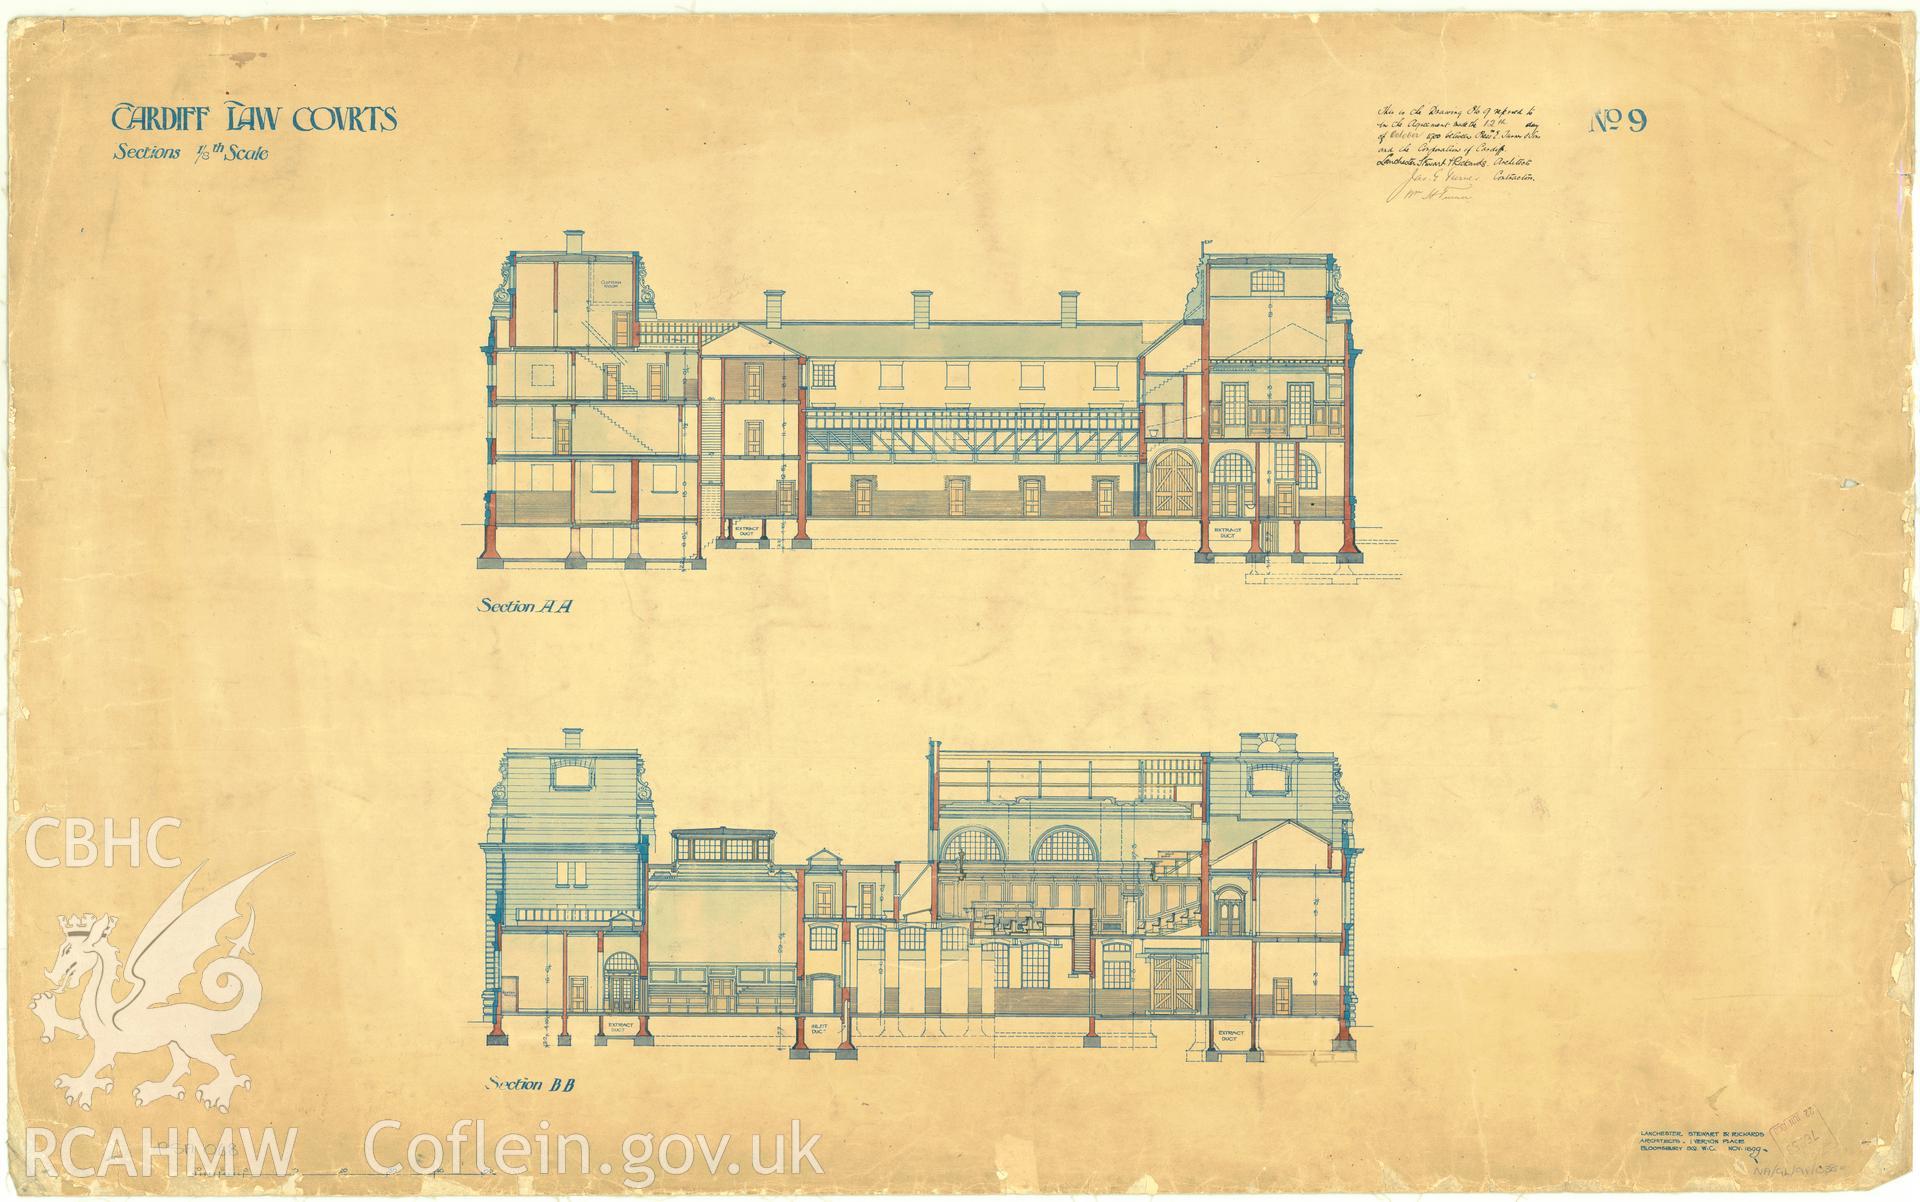 Law Court, Cathays Park, Cardiff; measured drawing showing section views, produced by Lanchester Stewart and Rickards, 1899.